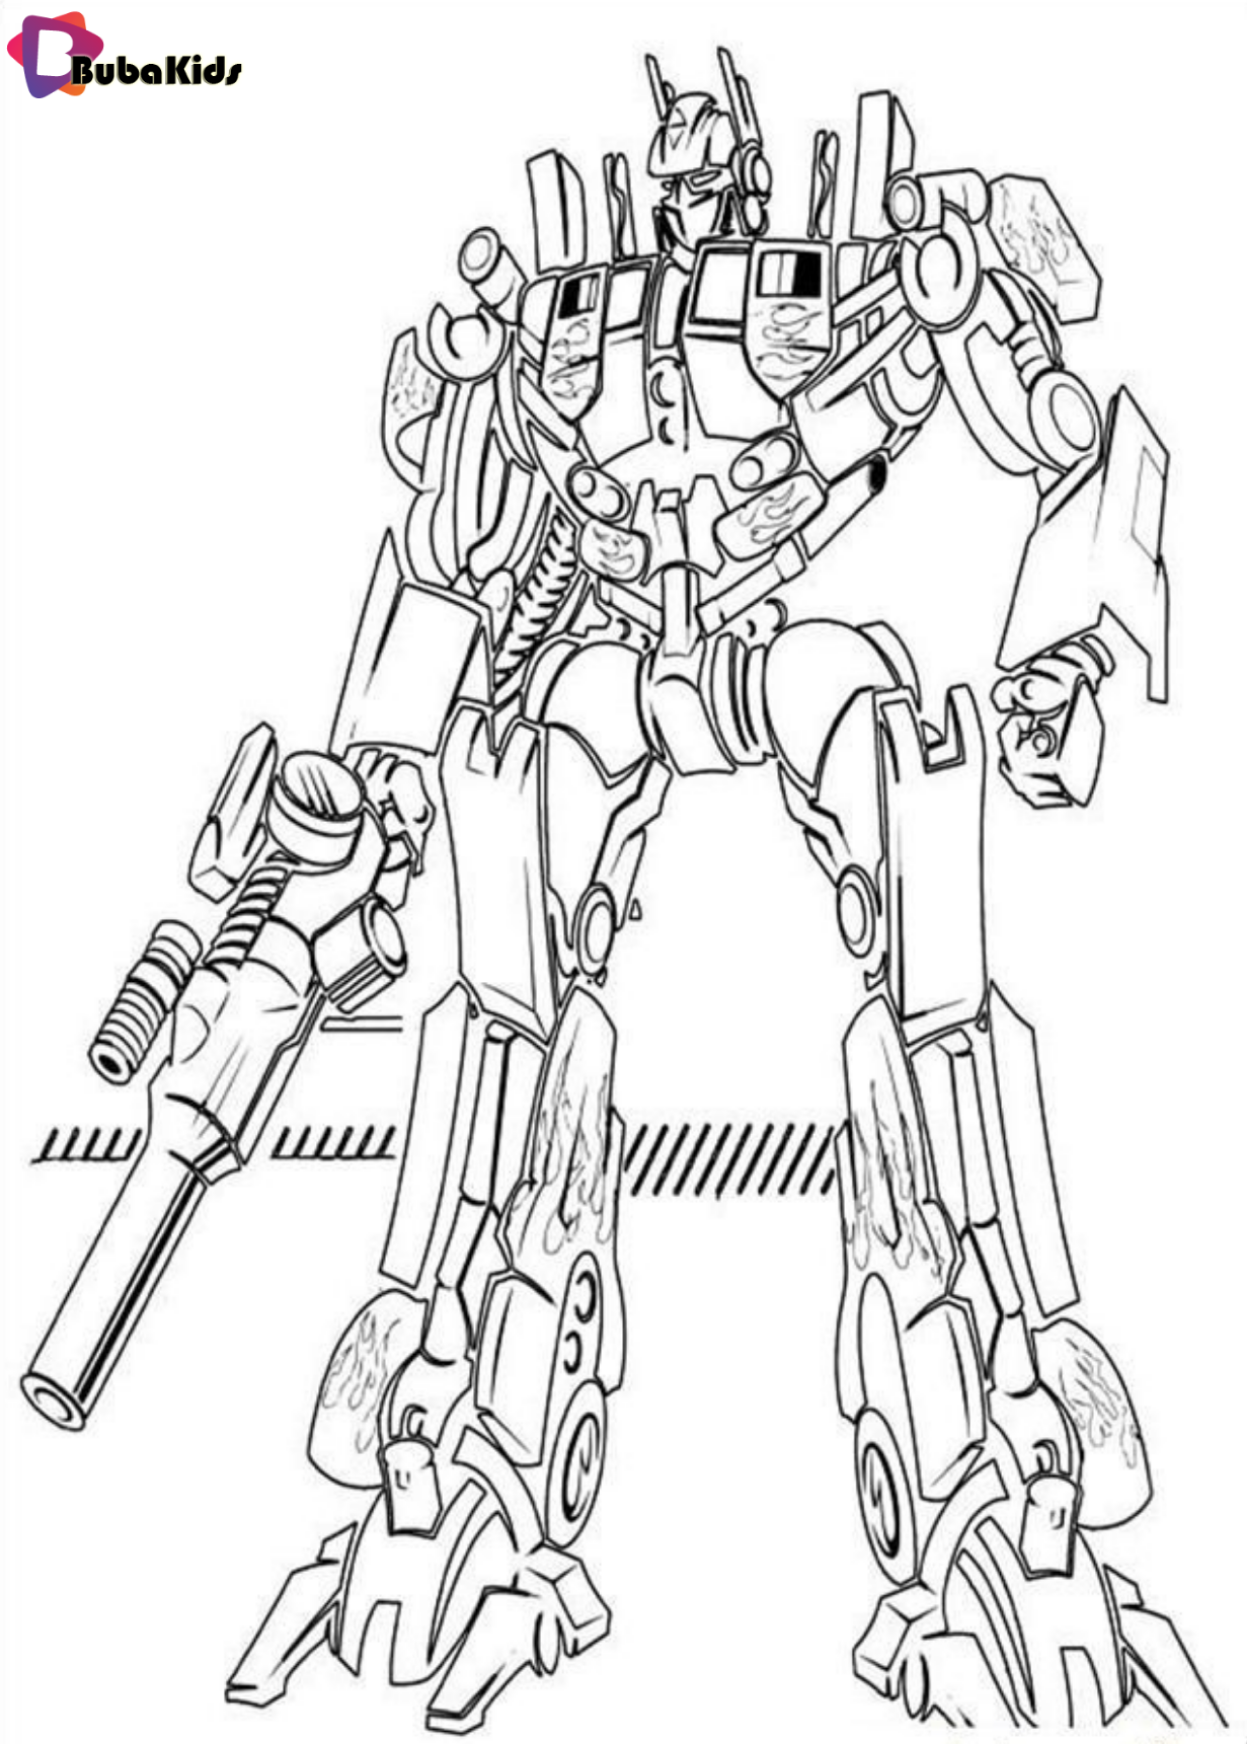 Easy Transformers Printable Coloring Pages | free printable coloring page Transformer on bubakids.com Wallpaper